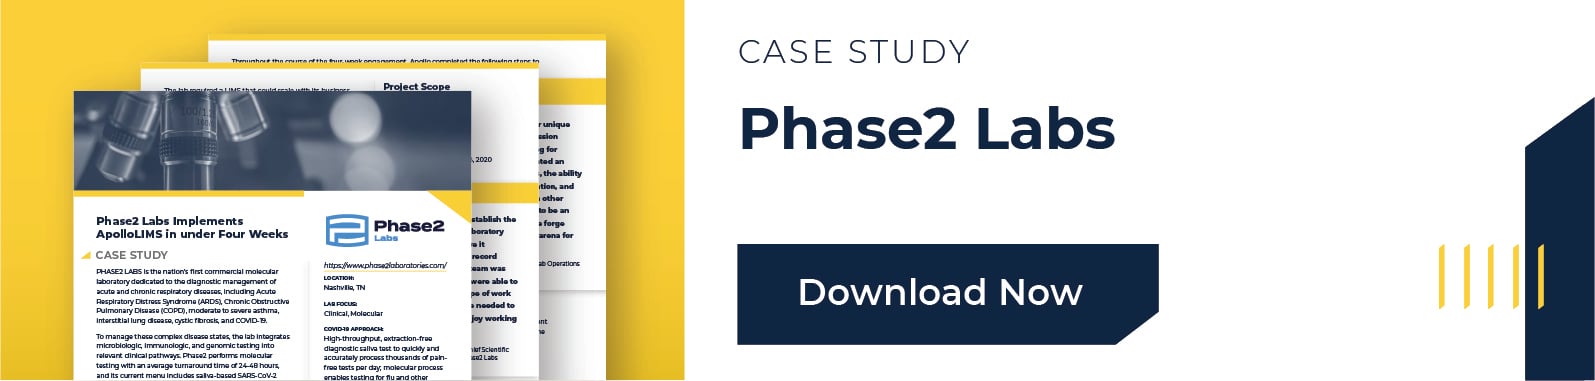 Phase2 Labs Case Study with ApolloLIMS